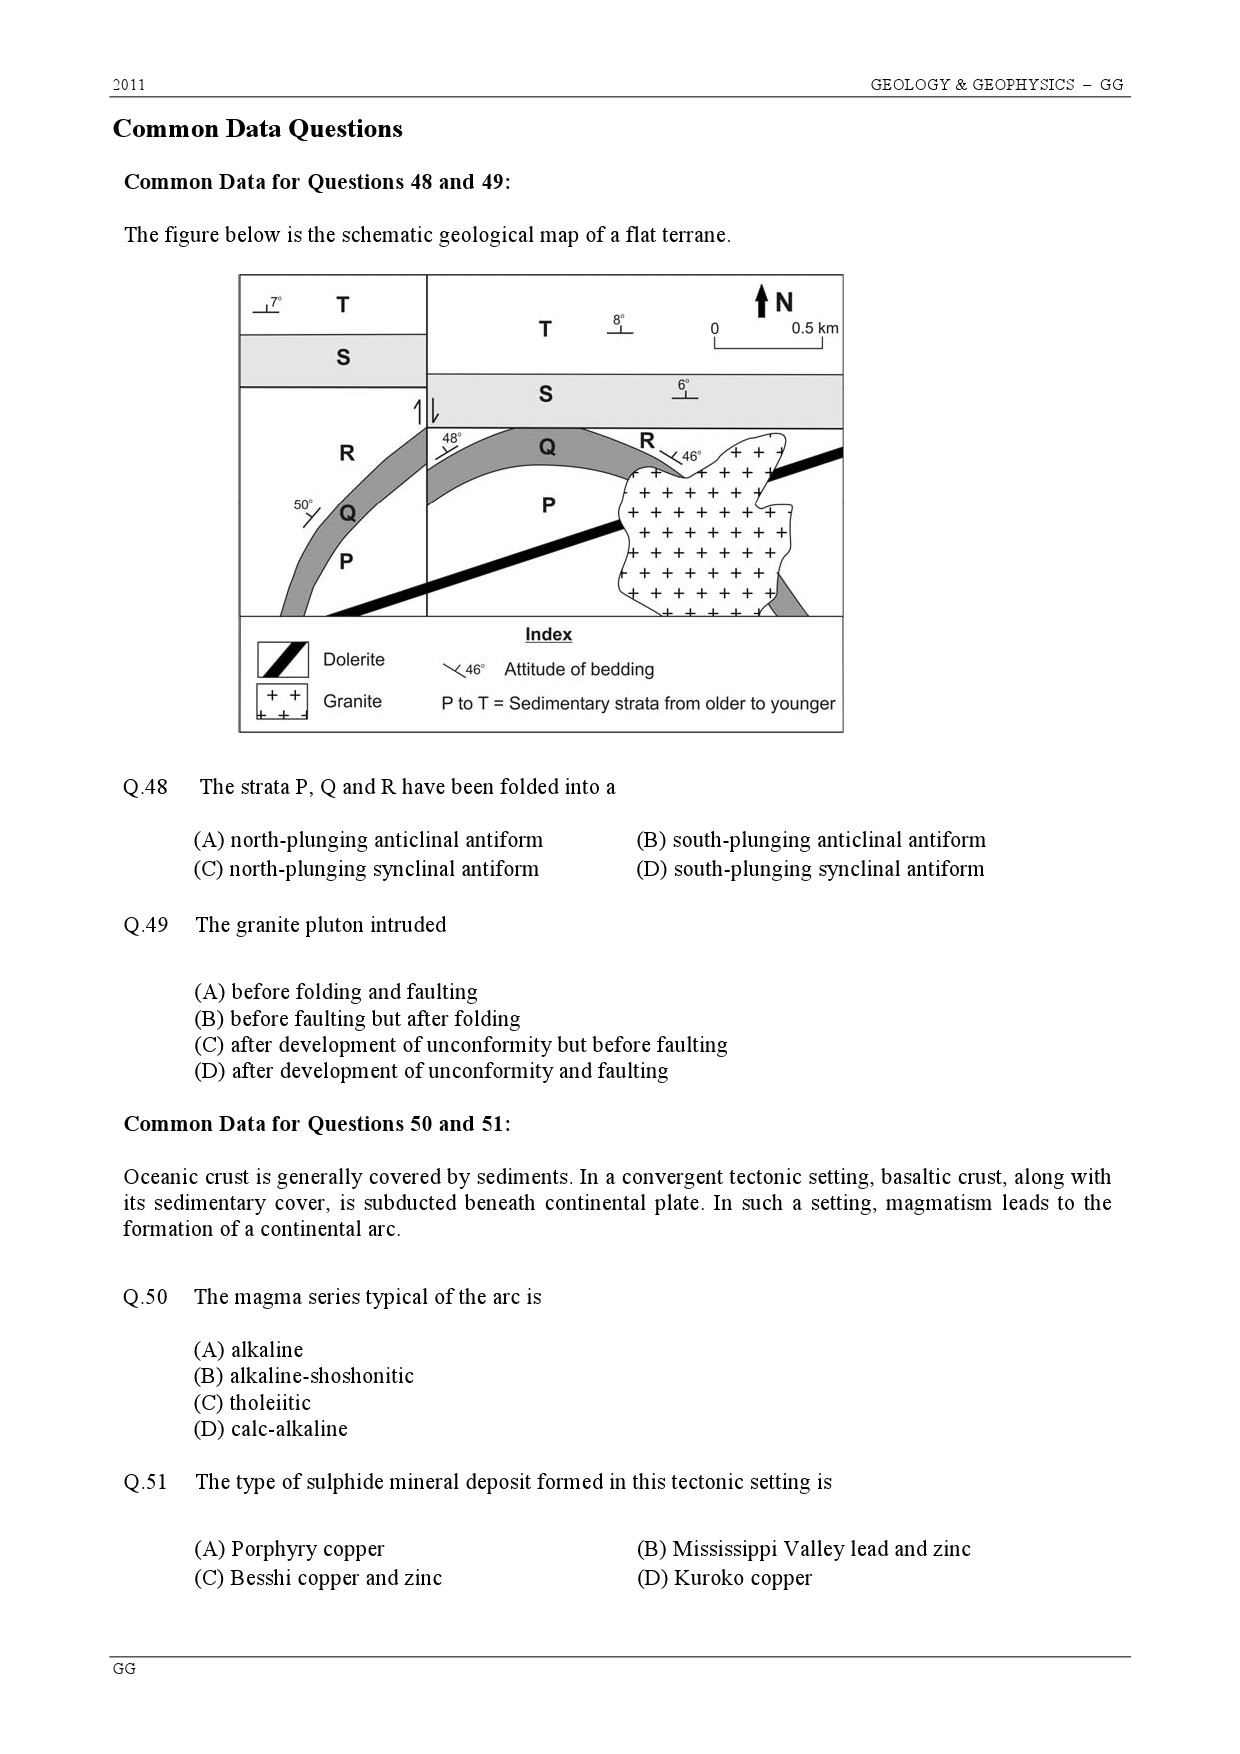 GATE Exam Question Paper 2011 Geology and Geophysics 9